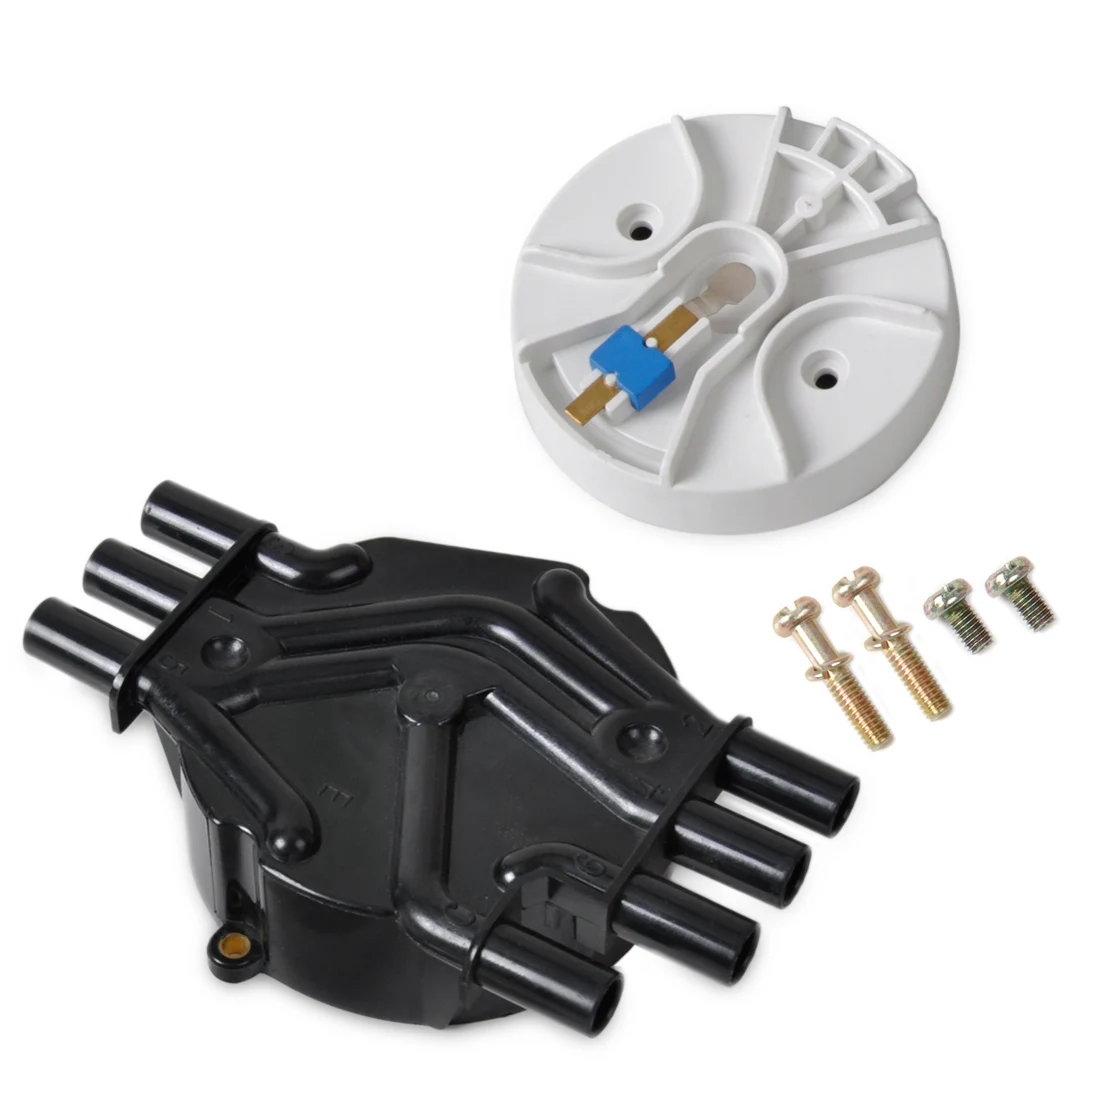 GM Distributor Cap Rotor & Wires Kit Compatible with Astro G1500 Bravada 4.3L V6 